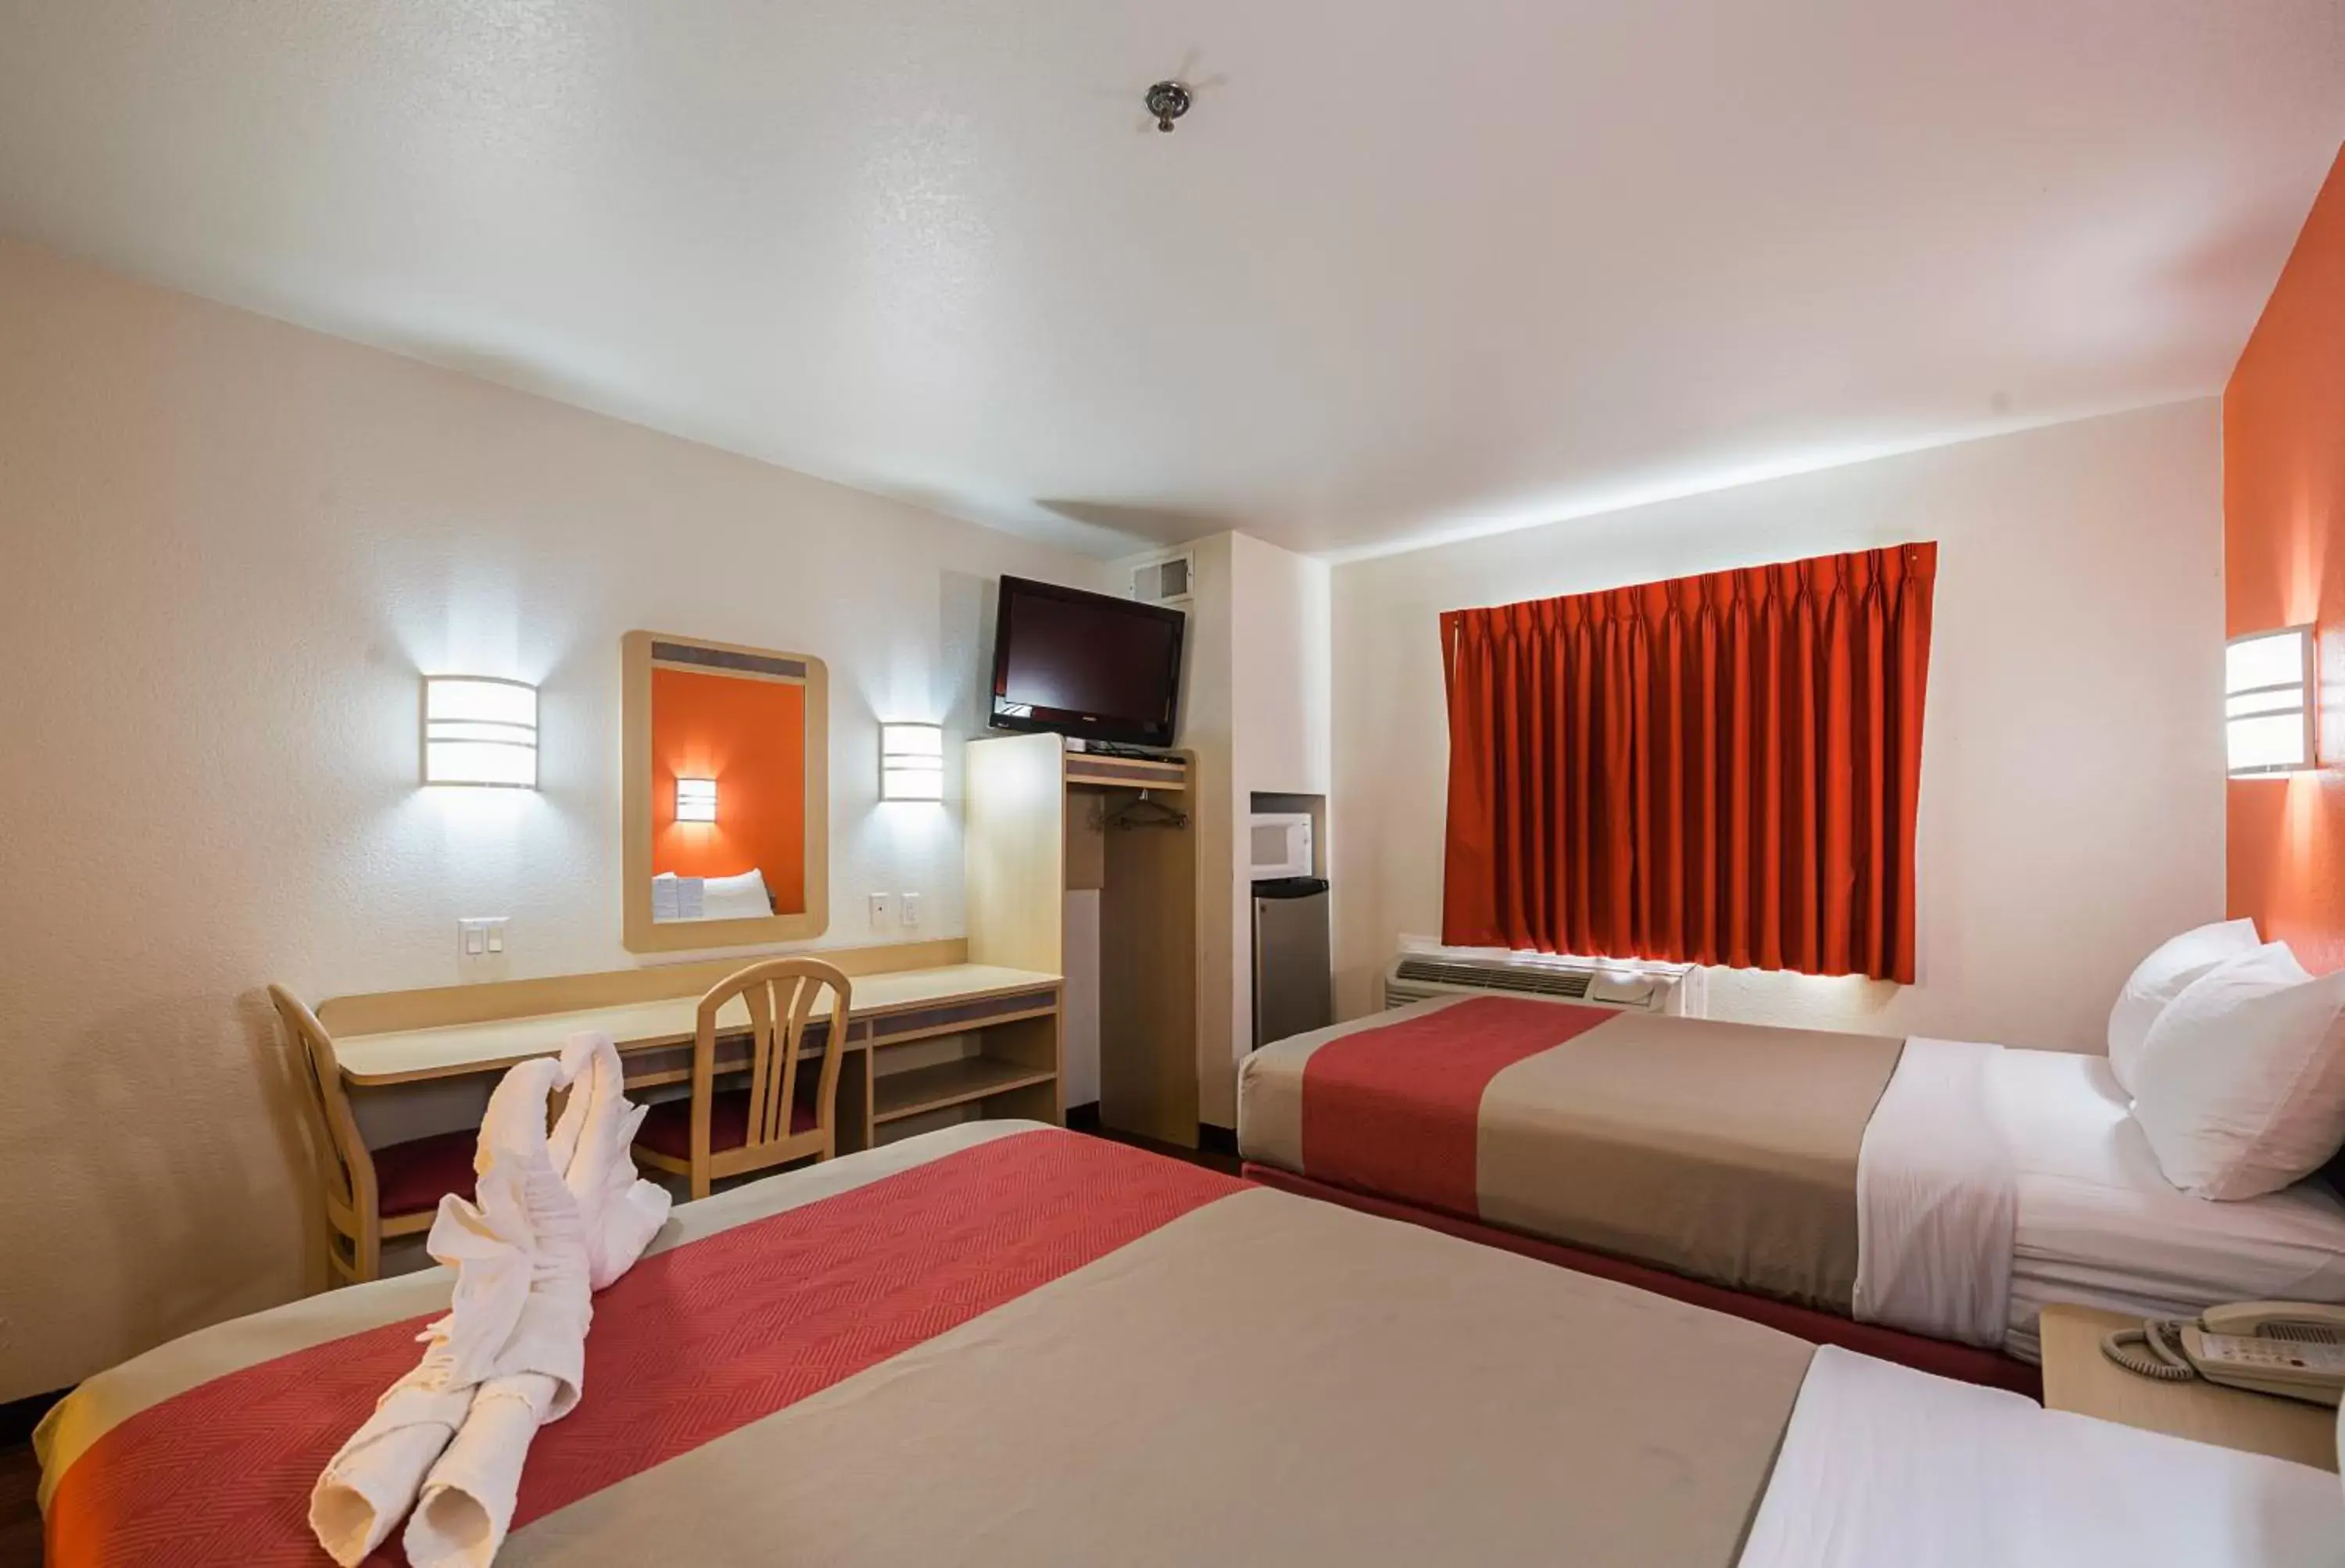 Property building, Room Photo in Motel 6 Athens